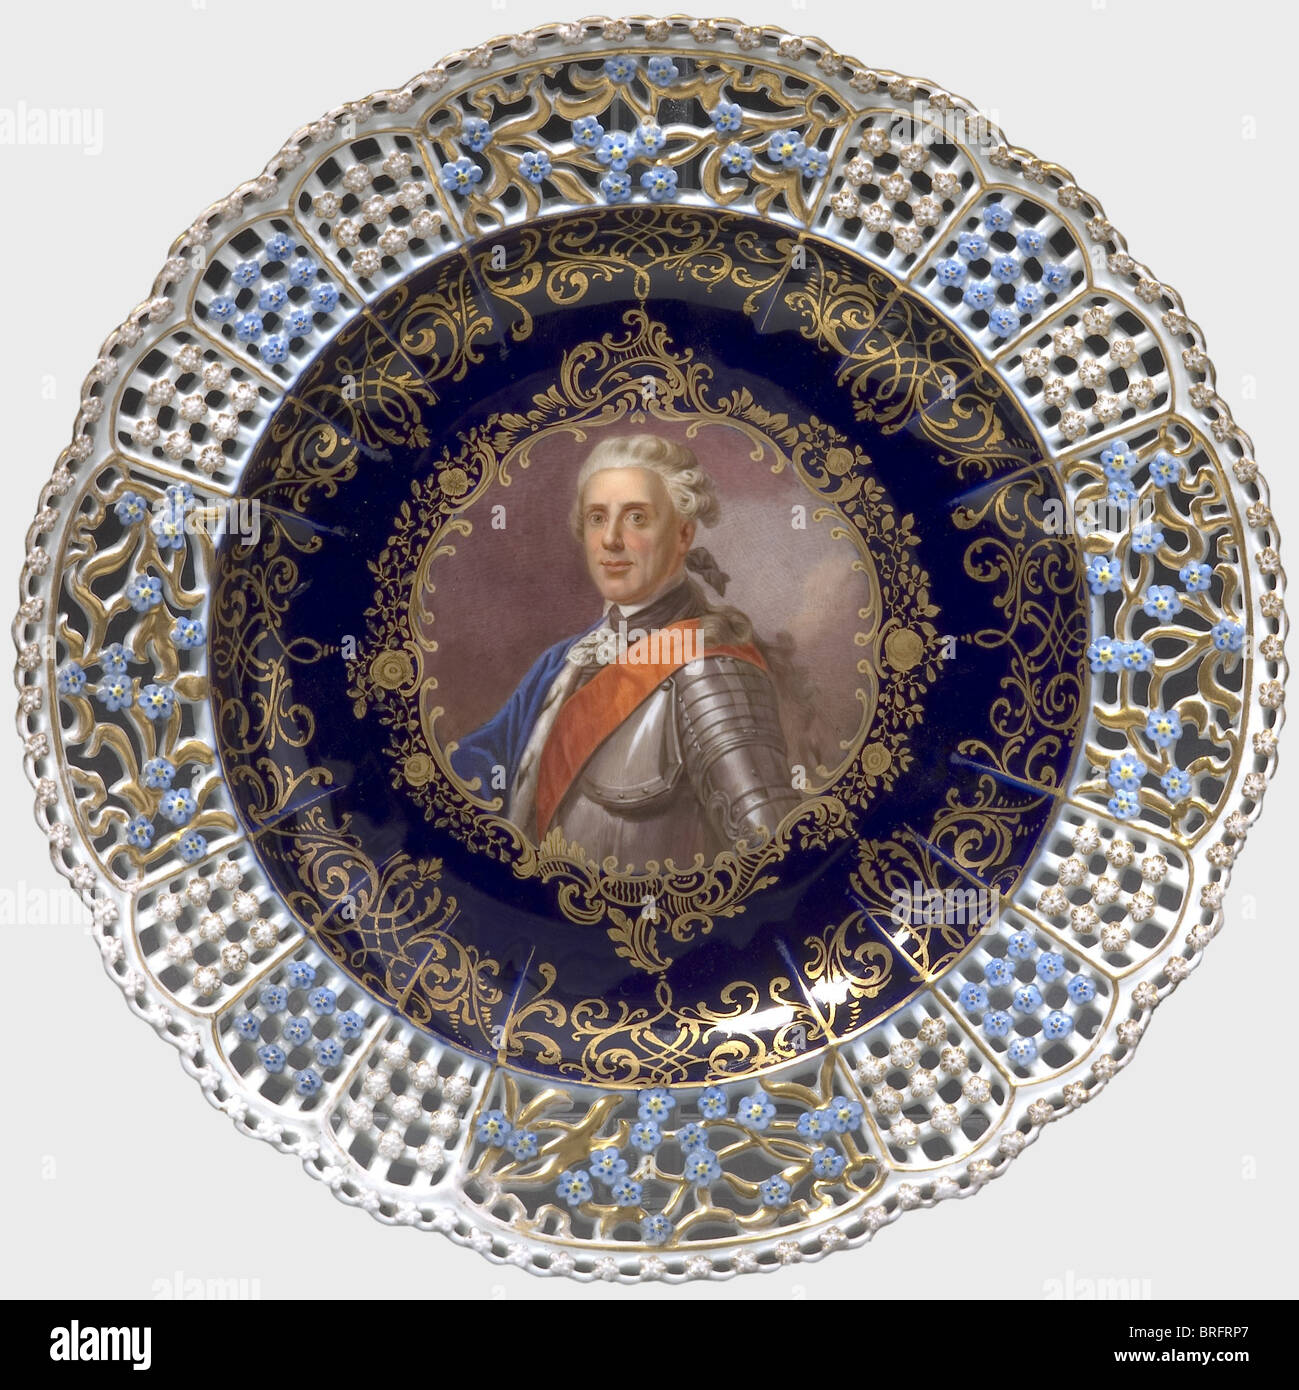 Prince Heinrich of Prussia (1727 - 1802) - an openwork plate, Meissen, circa 1860, with a fine hand-painted portrait of Frederick the Great's brother on a cobalt blue/golden background in the centre. The subject is identified on the back, which also displays an underglaze sword mark. Diameter 24.5 cm. people, 19th century, 18th century, Prussian, Prussia, German, Germany, militaria, military, object, objects, stills, clipping, clippings, cut out, cut-out, cut-outs, dishes, dish, plate, plates, man, men, male, Stock Photo